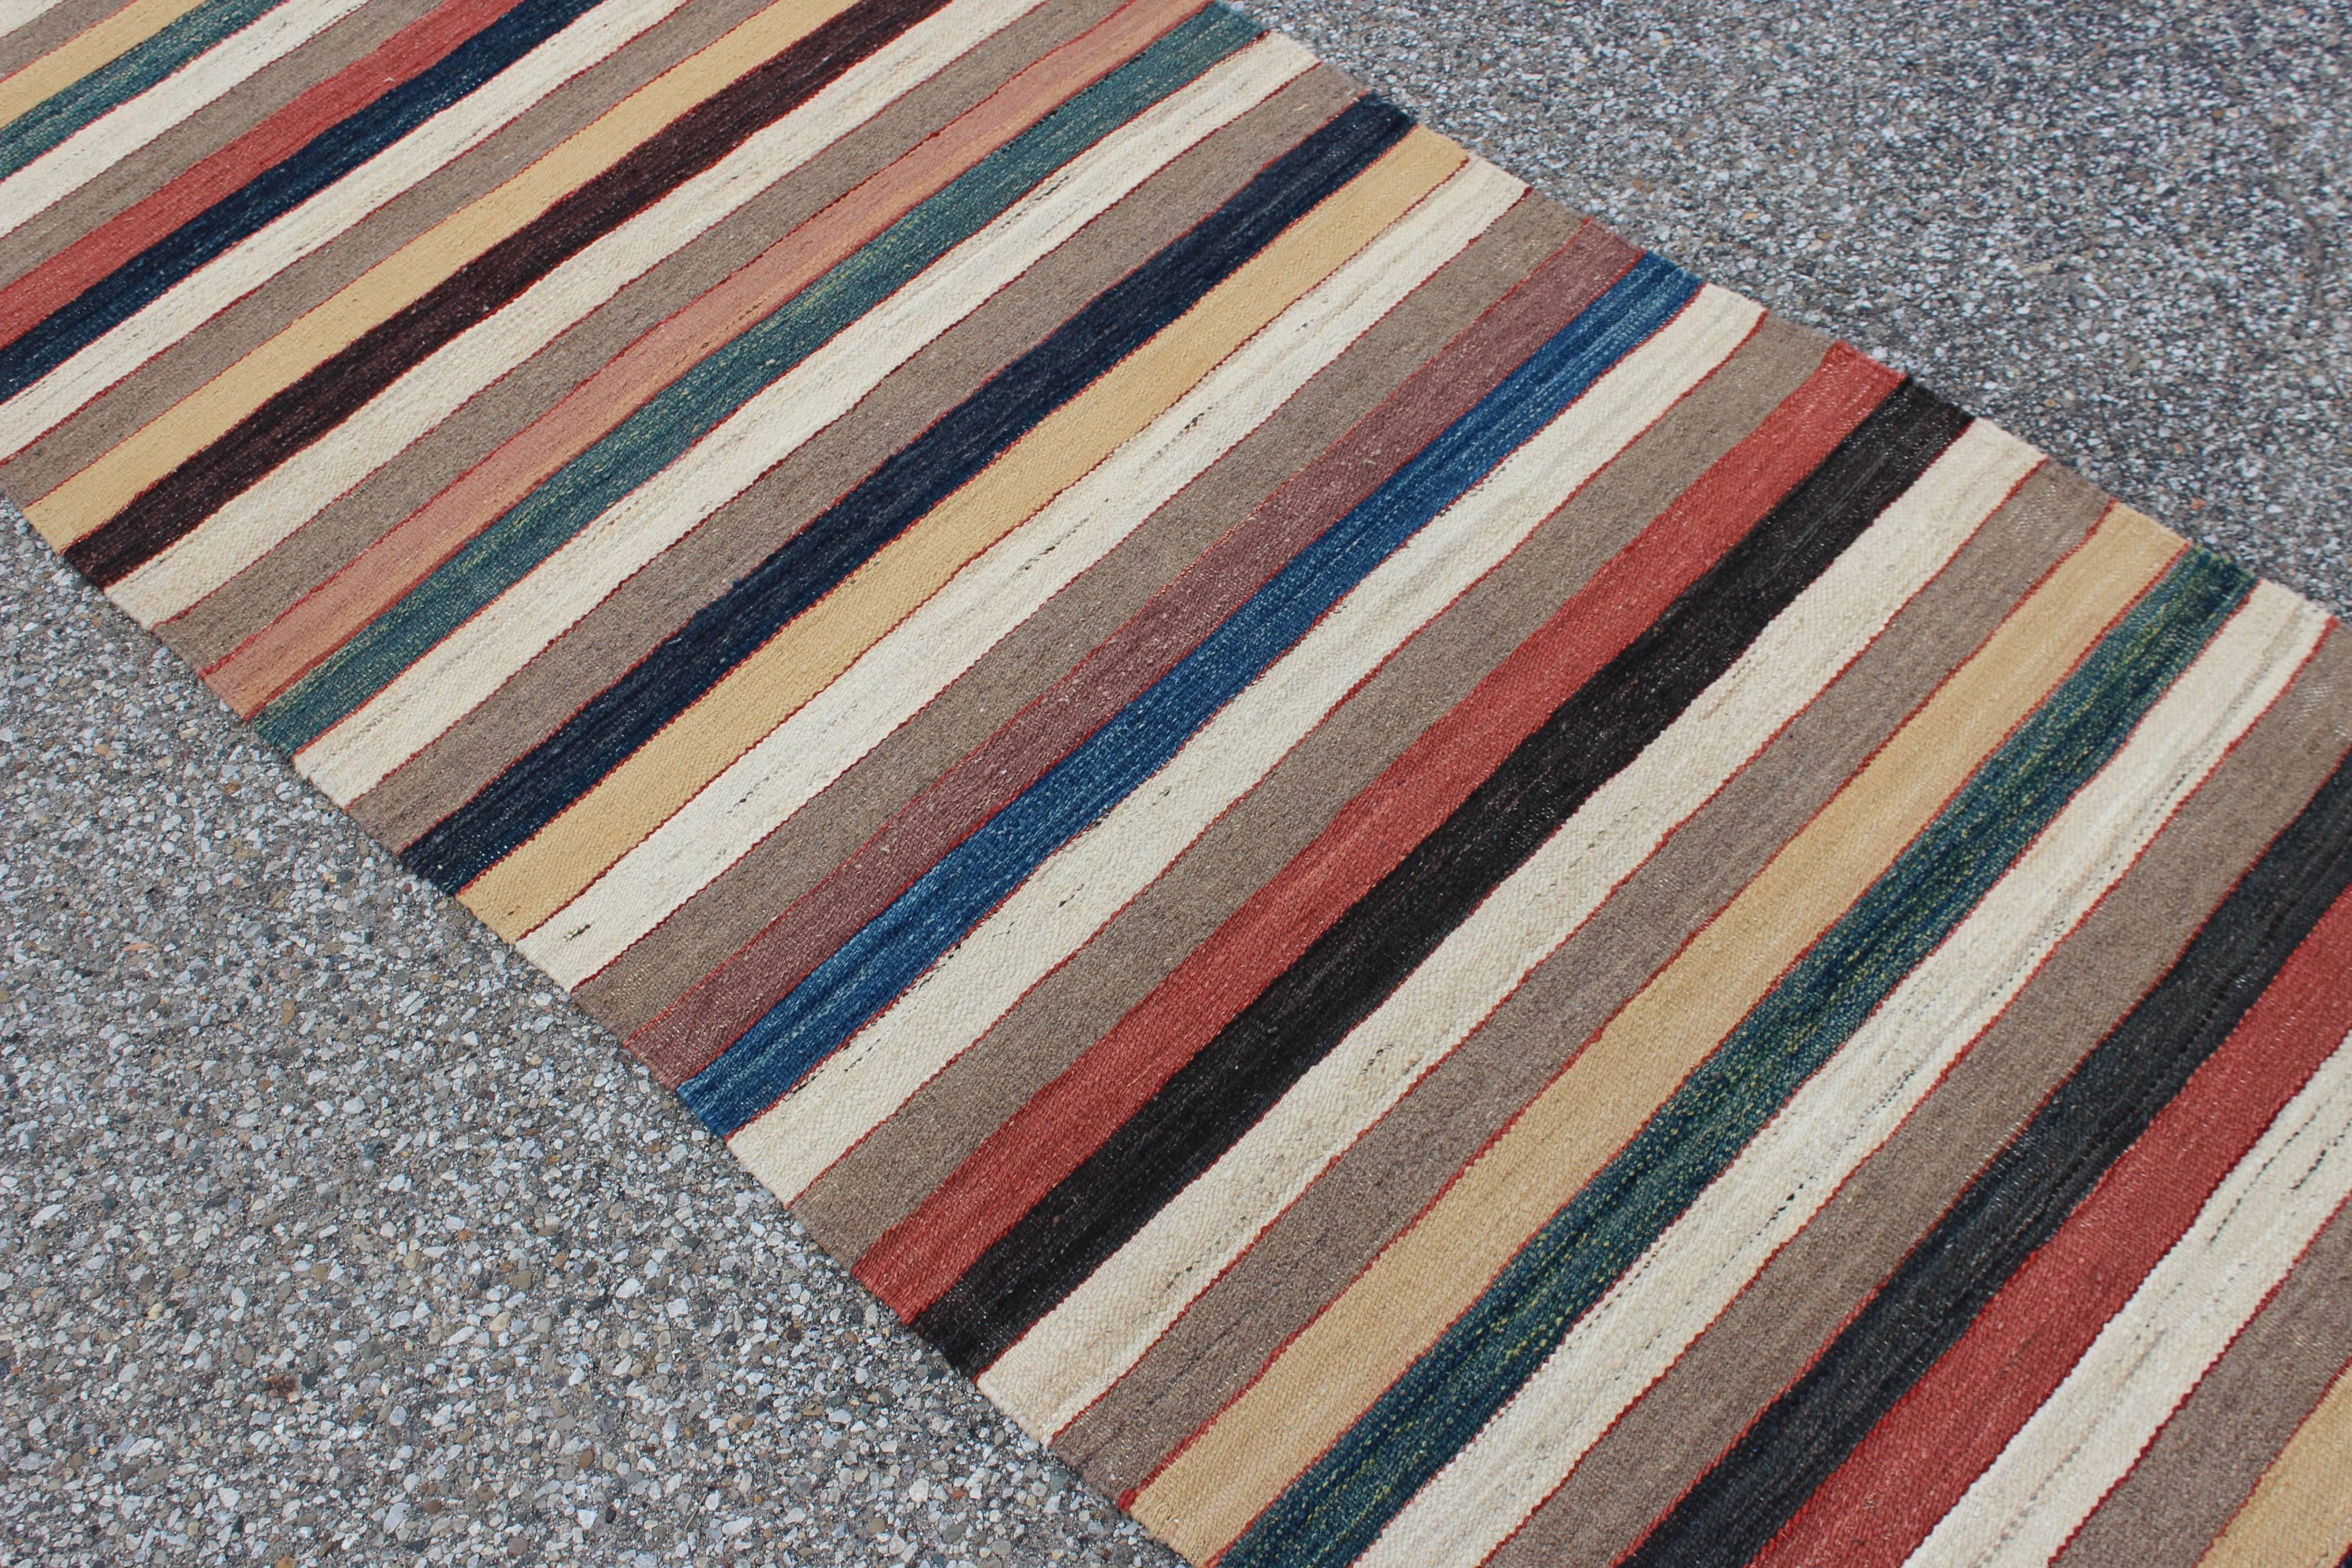 A gorgeous vintage handwoven Maimana Afghan Kilim runner rug. The rug is hand made from 100% wool with vegetable dyes. It has a beautiful multicolored stripe design, with natural colors. The rug is in excellent condition.